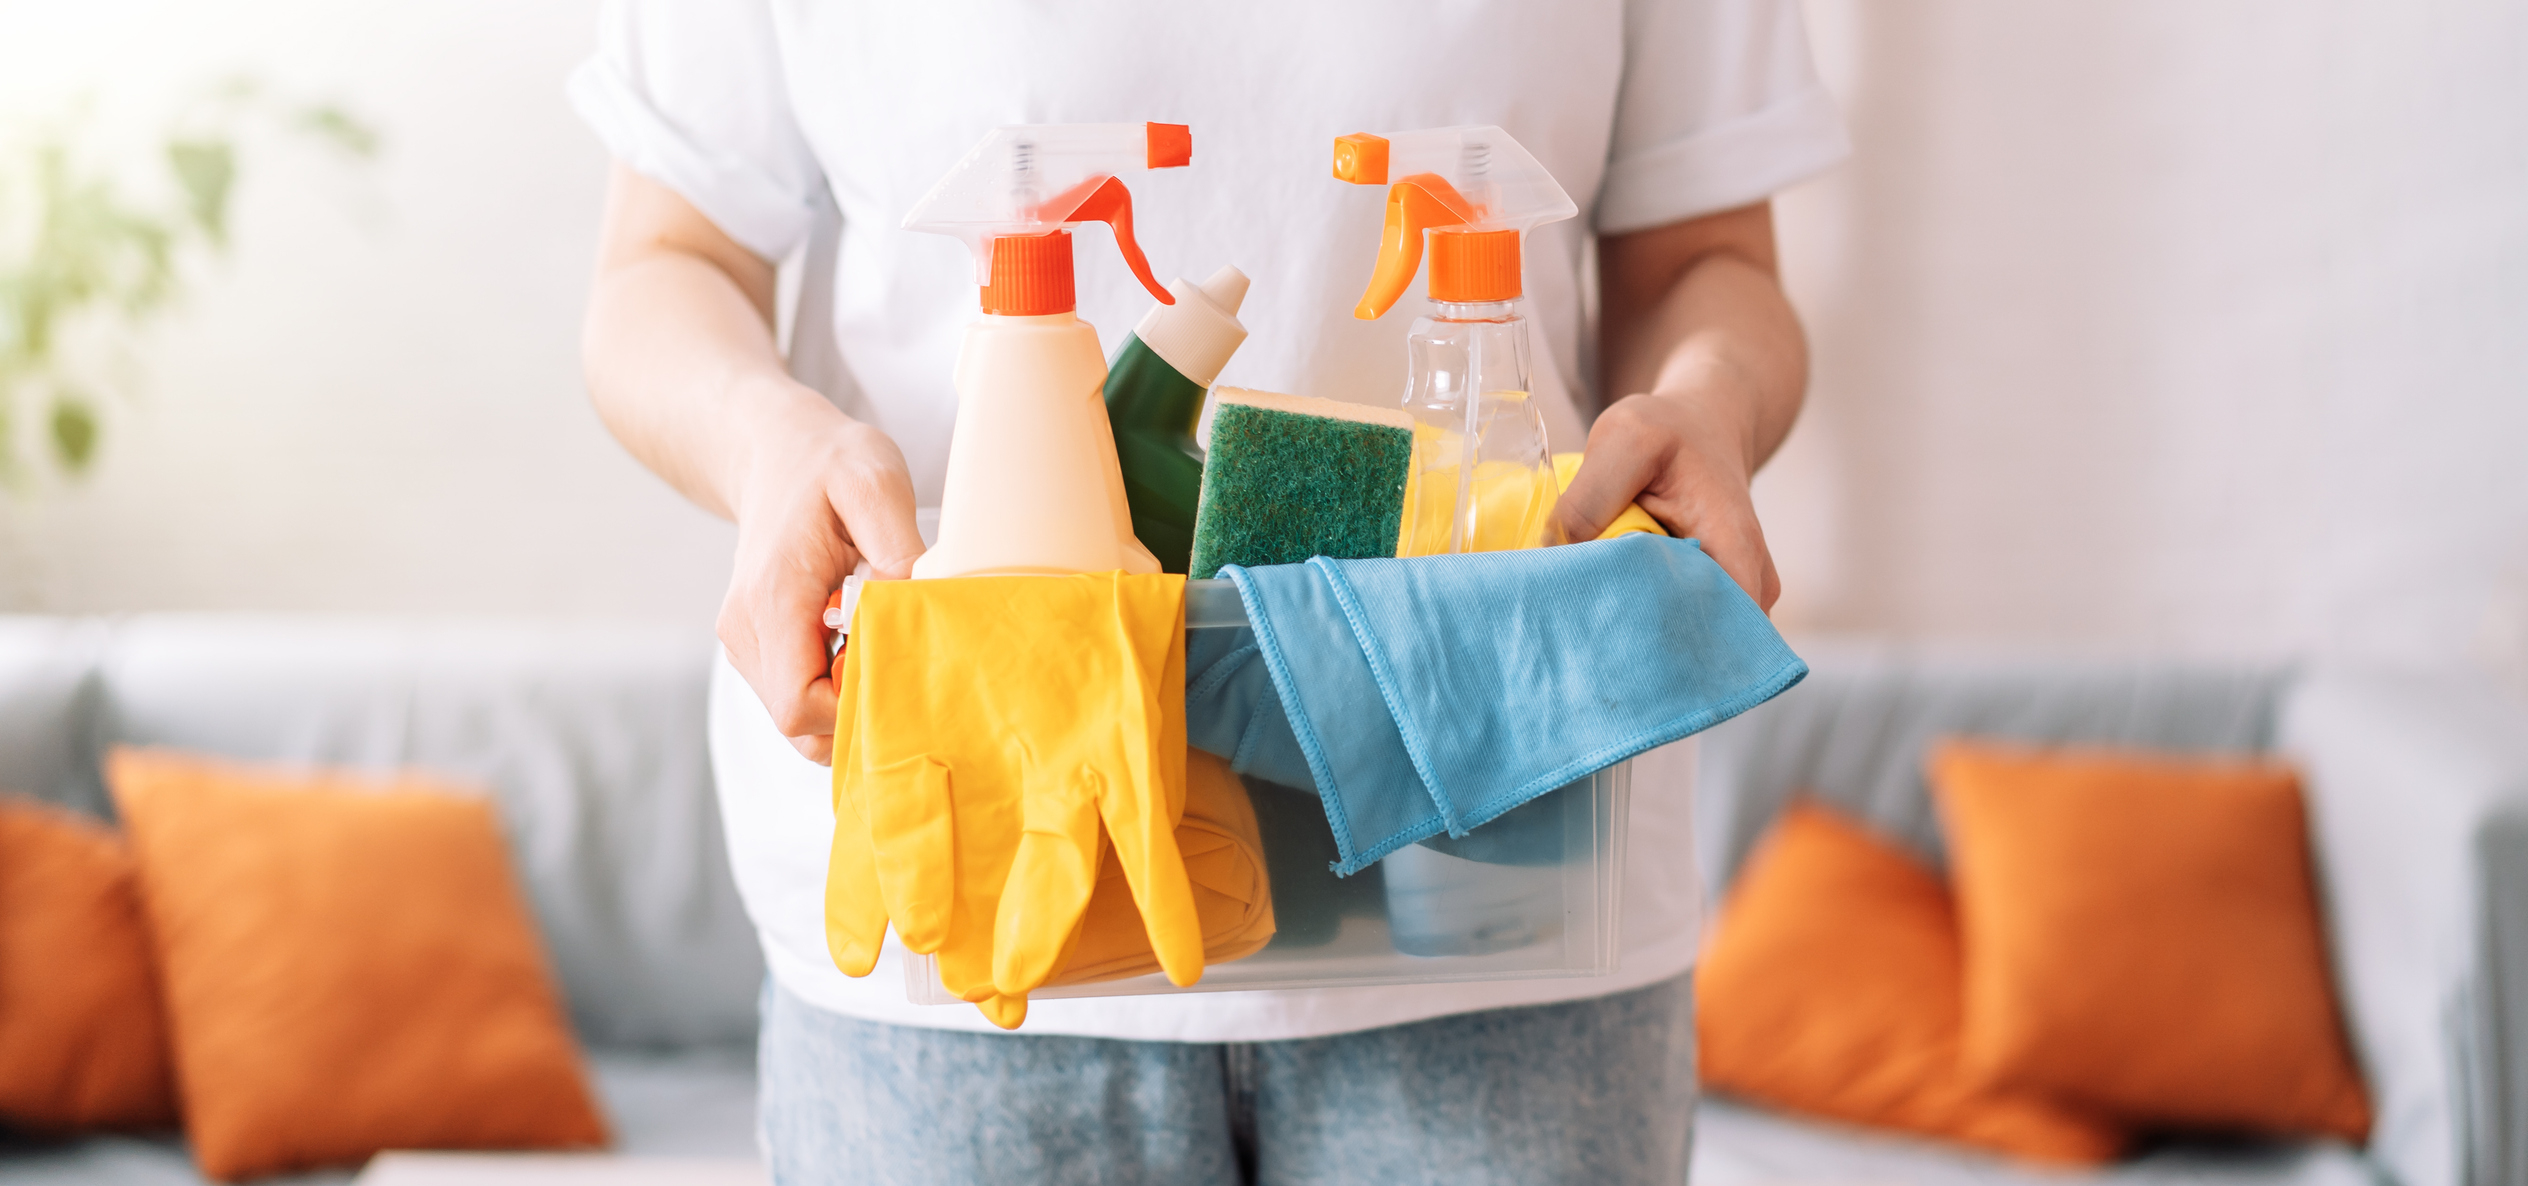 hands holding cleaning supplies